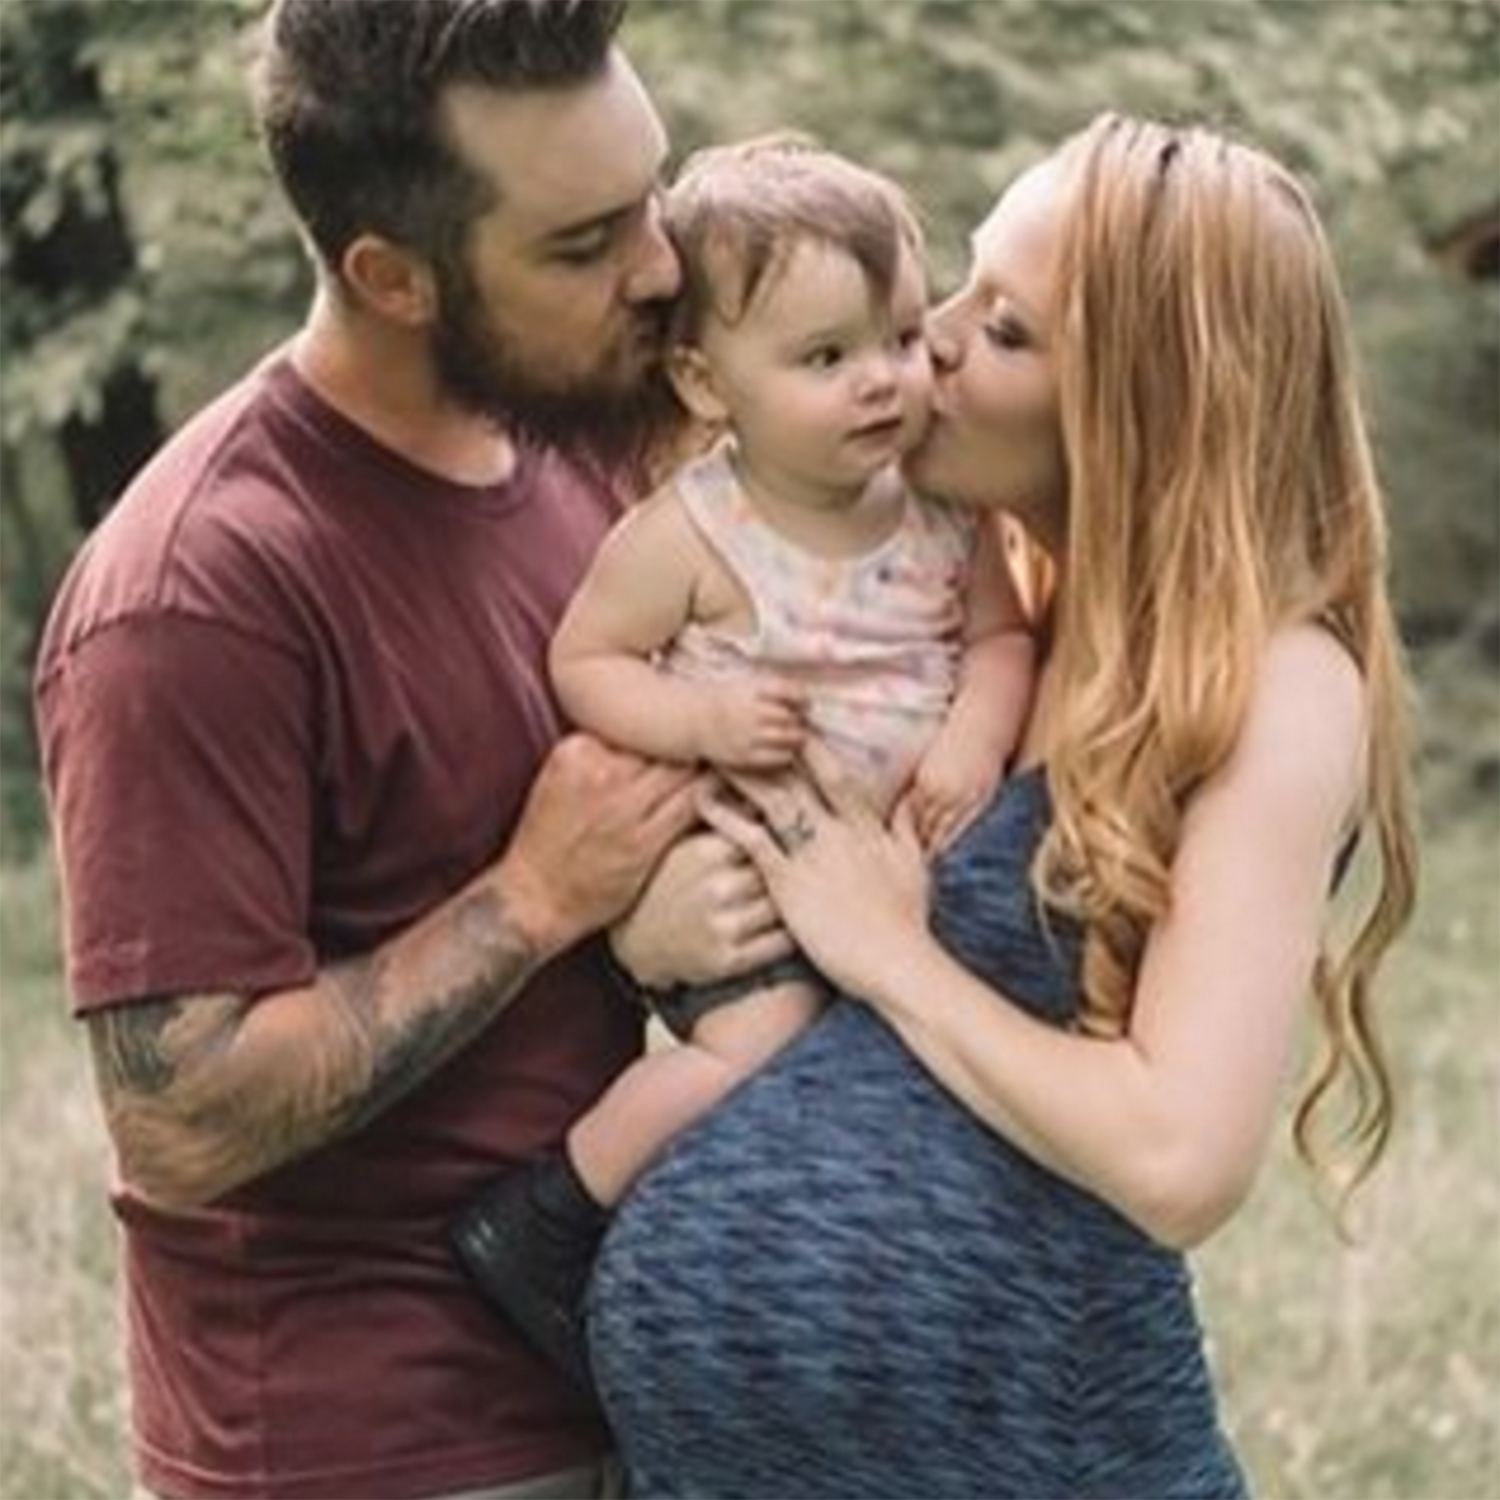 Maci Bookout Wishes Daughter Jayde Happy Birthday in Cute Pic1500 x 1500